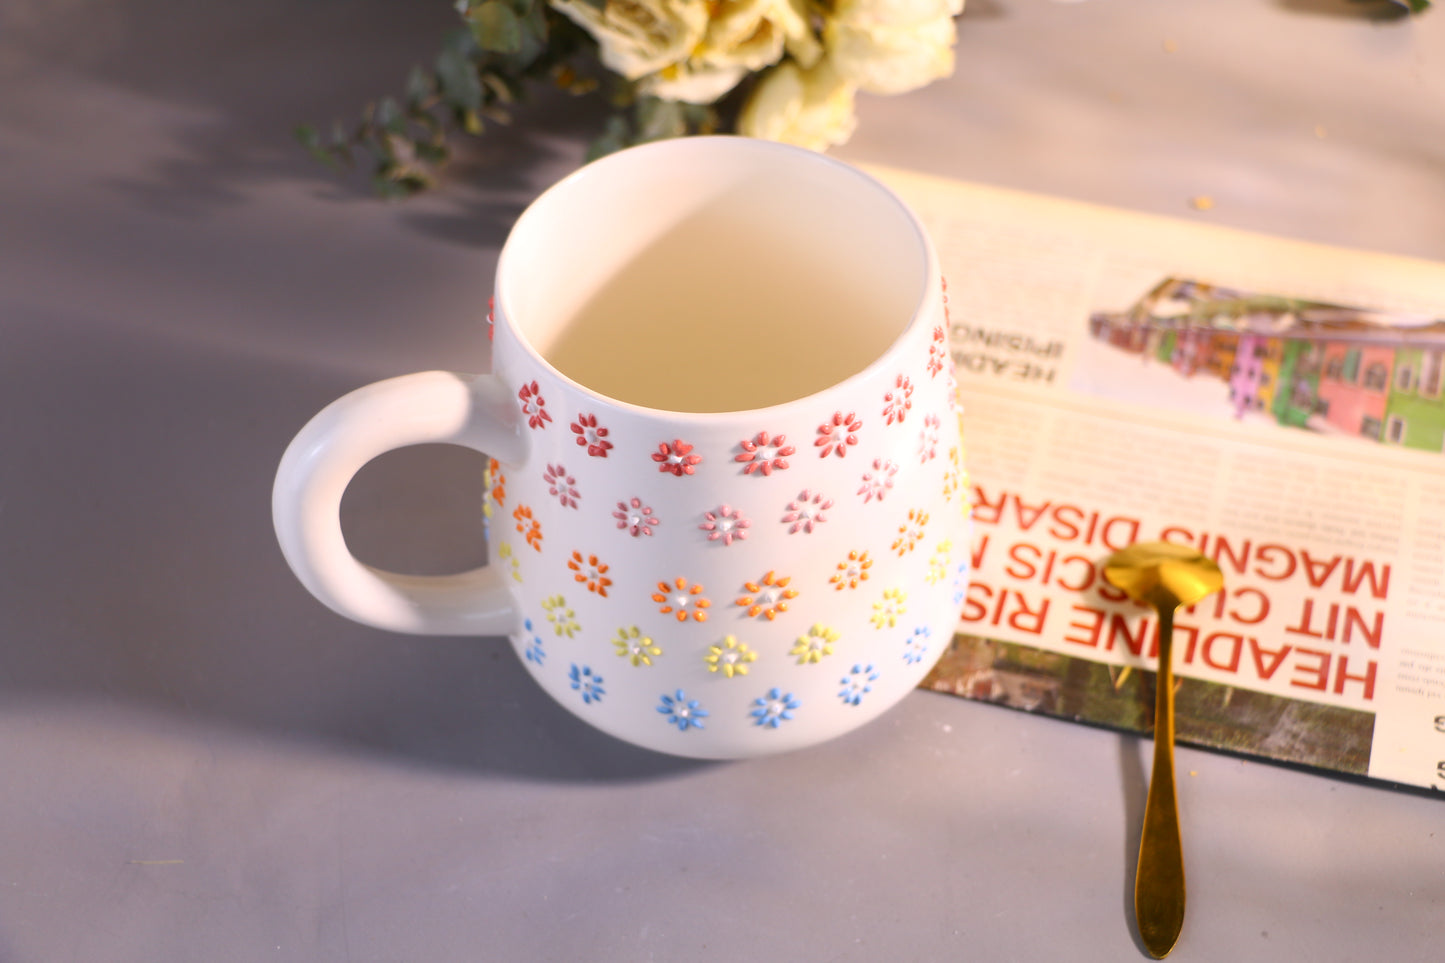 Rainbow Flower Ceramic Coffee Mug, Personalized Handmade Pottery Cup for Gifts